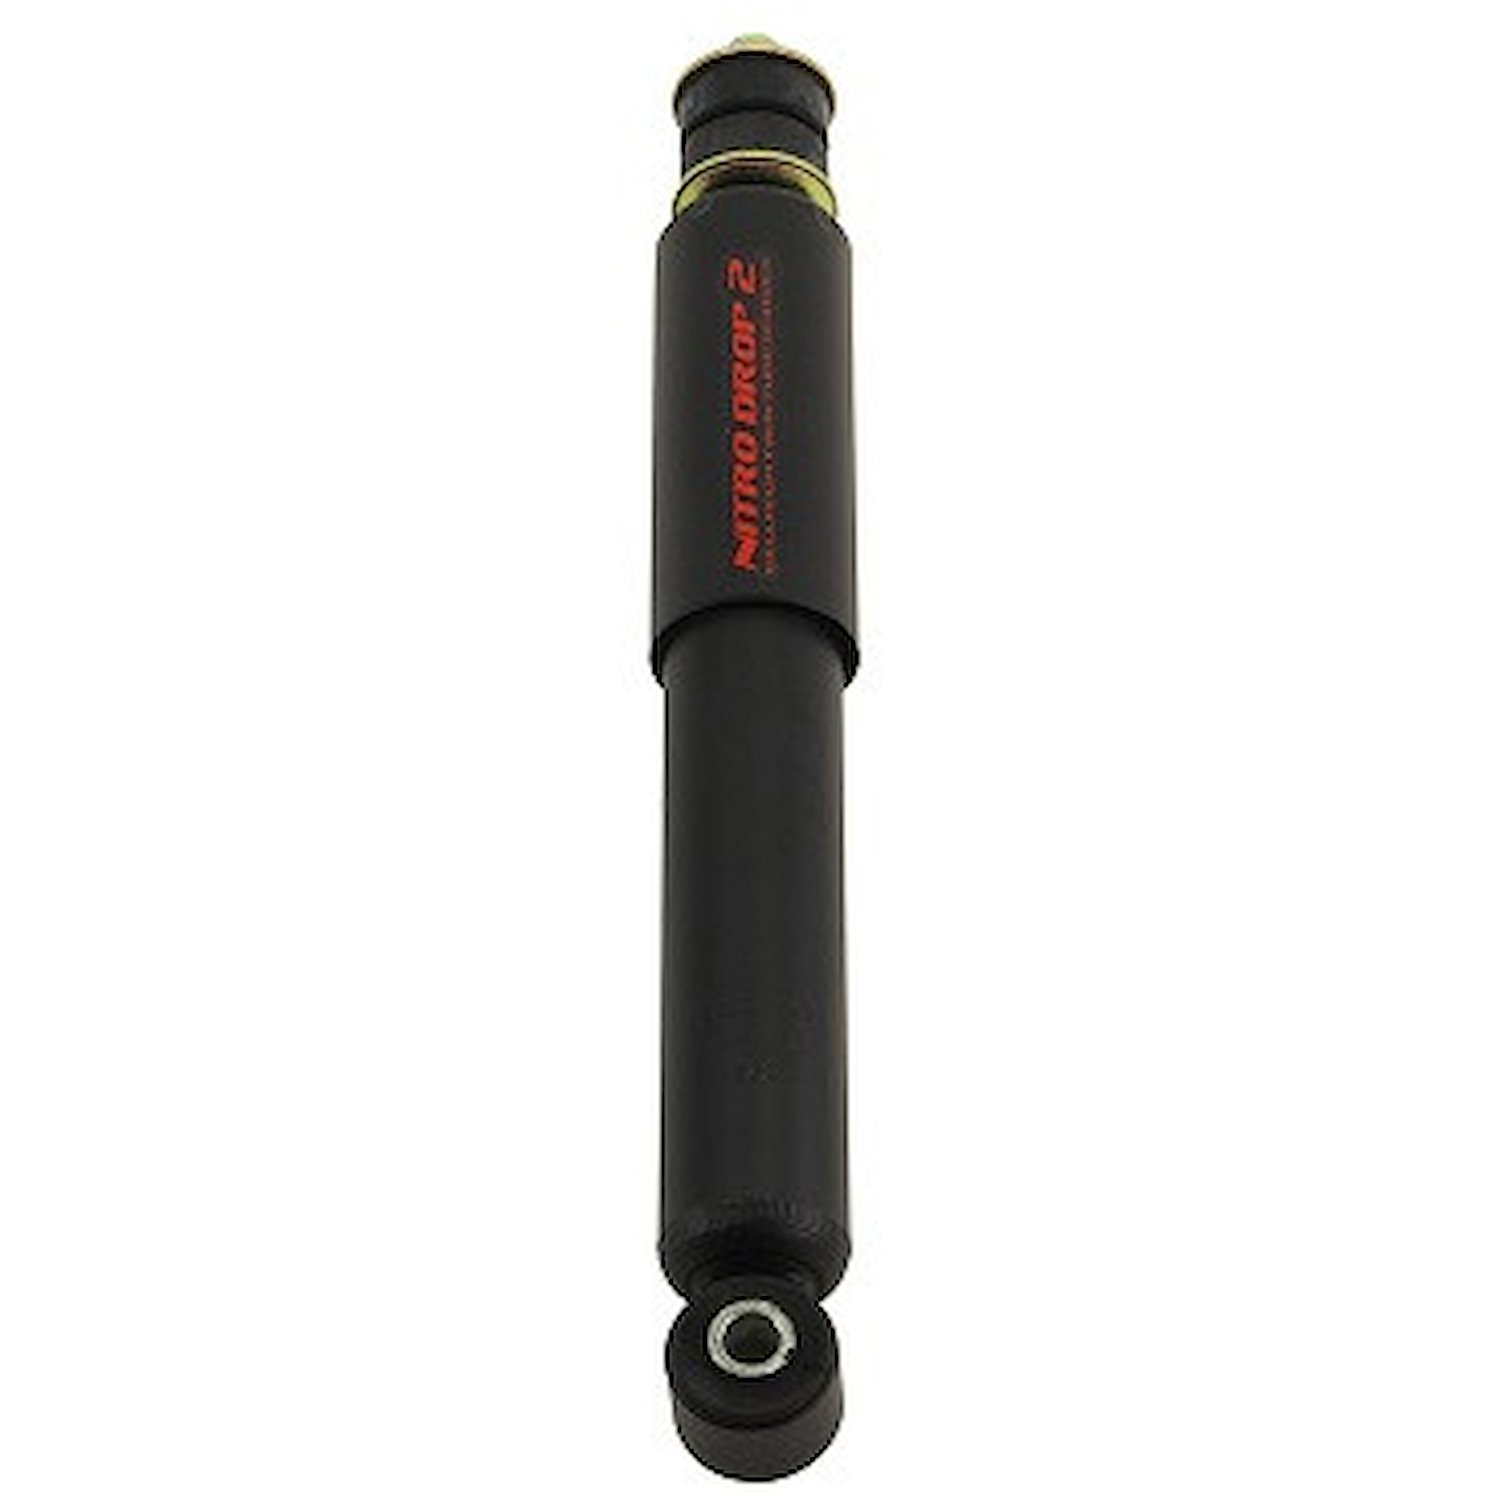 Nitro Drop 2 Front Shock Absorber for 1999-2004 Ford F-250/F-350 4WD Trucks